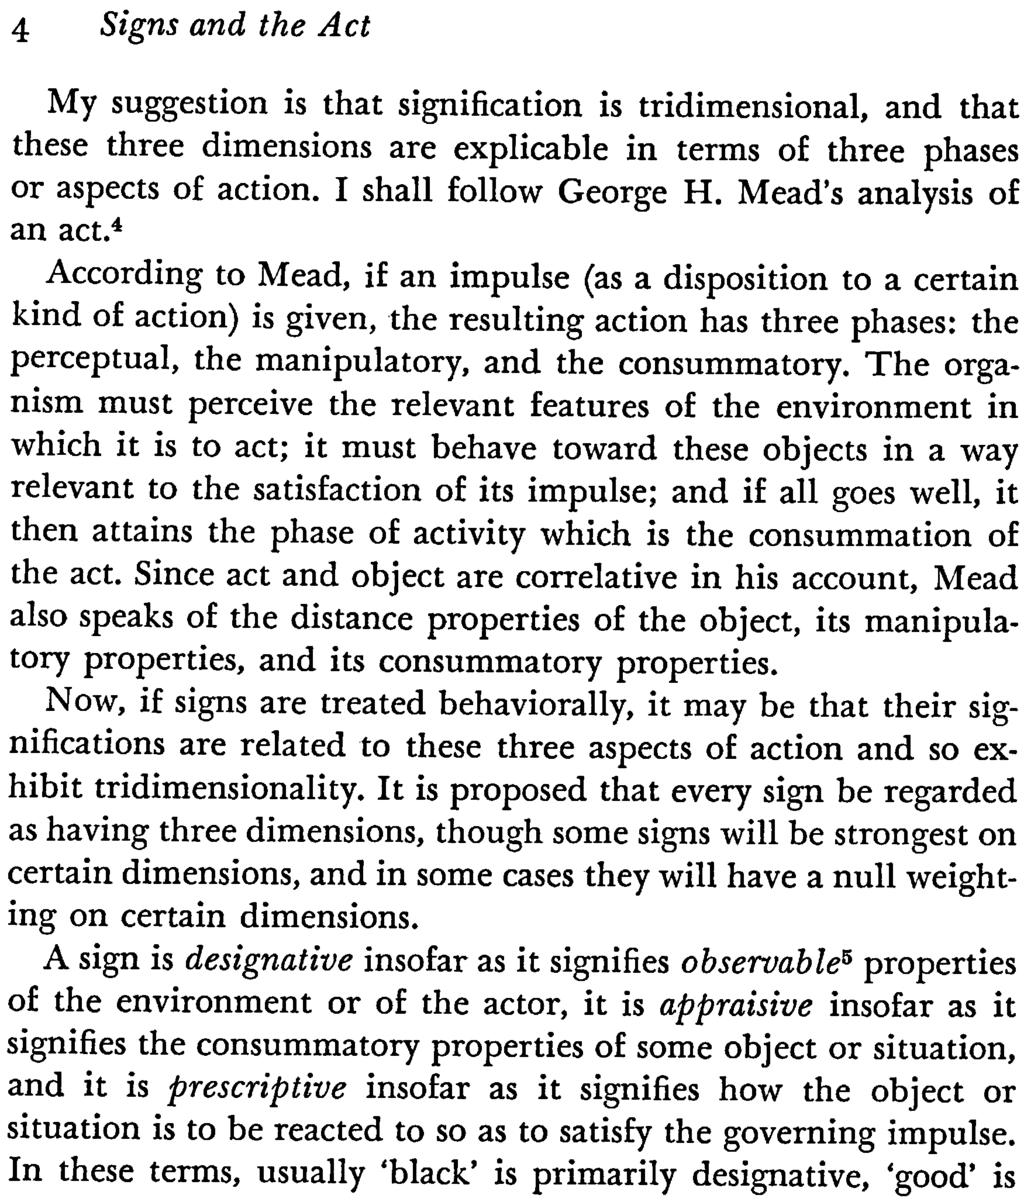 4 According to Mead, if an impulse (as a disposition to a certain kind of action ) is given, the resulting action has three phases: the perceptual, the manipulatory, and the consummatory.